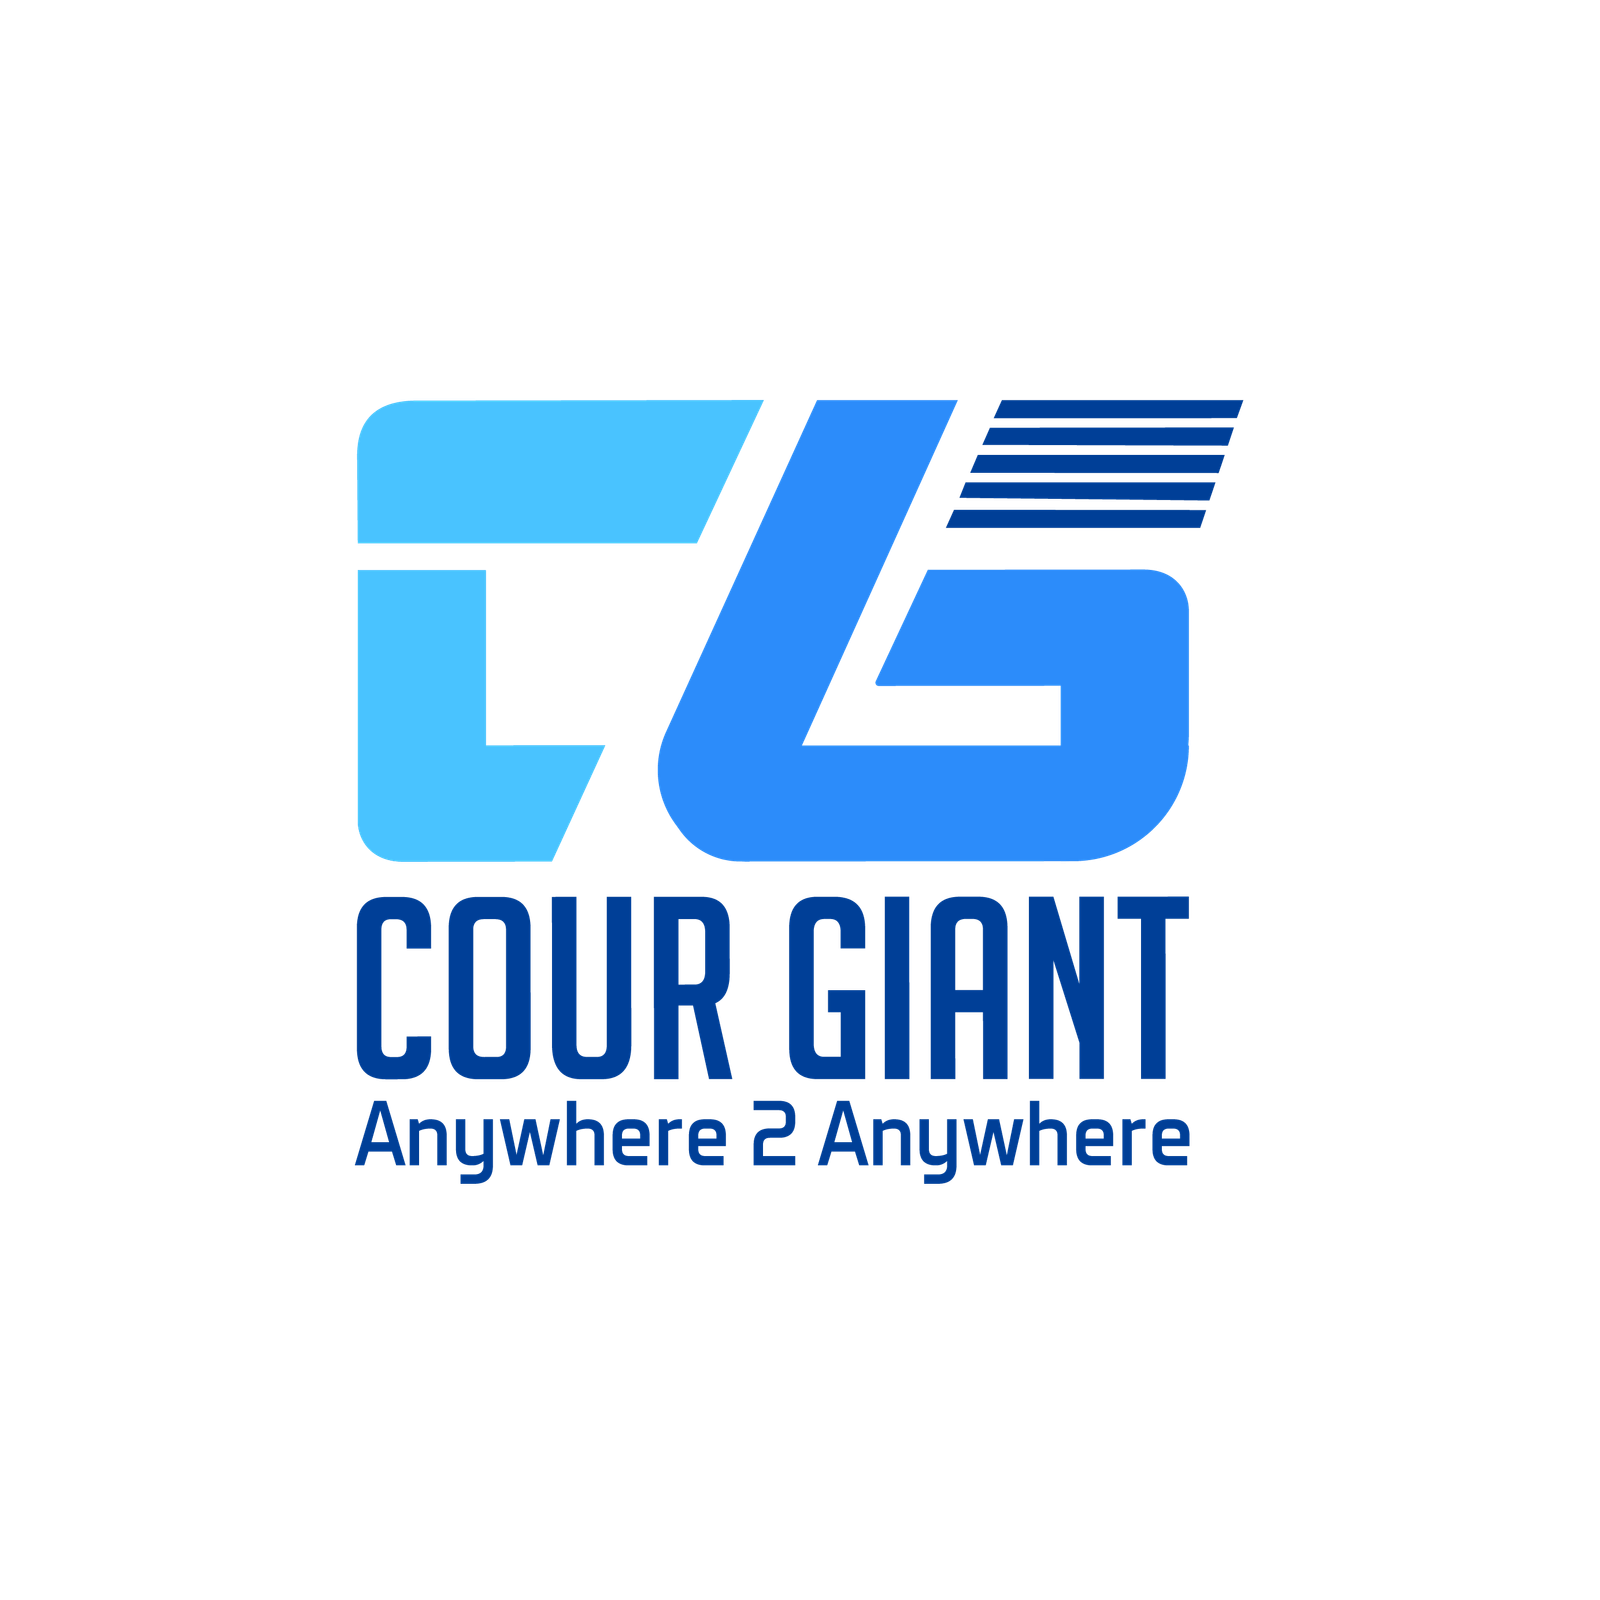 CourGiant